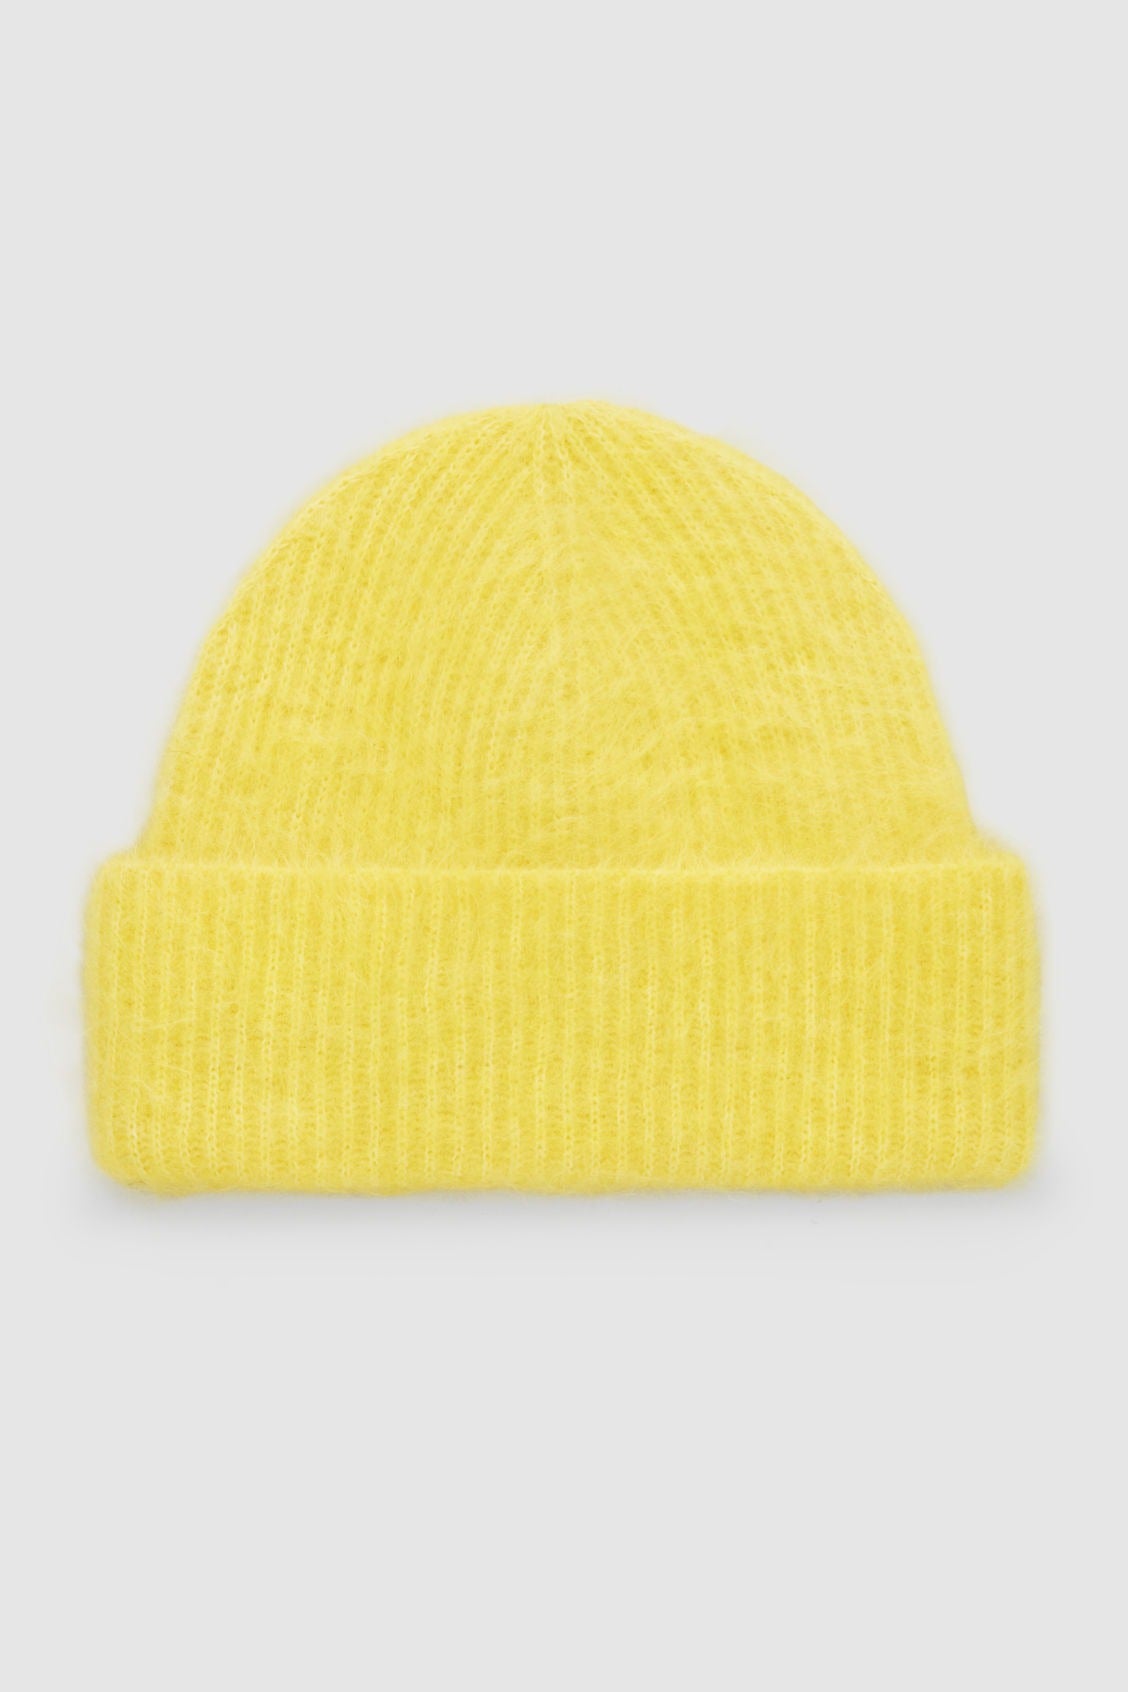 COS + Texture Knitted Beanie Hat